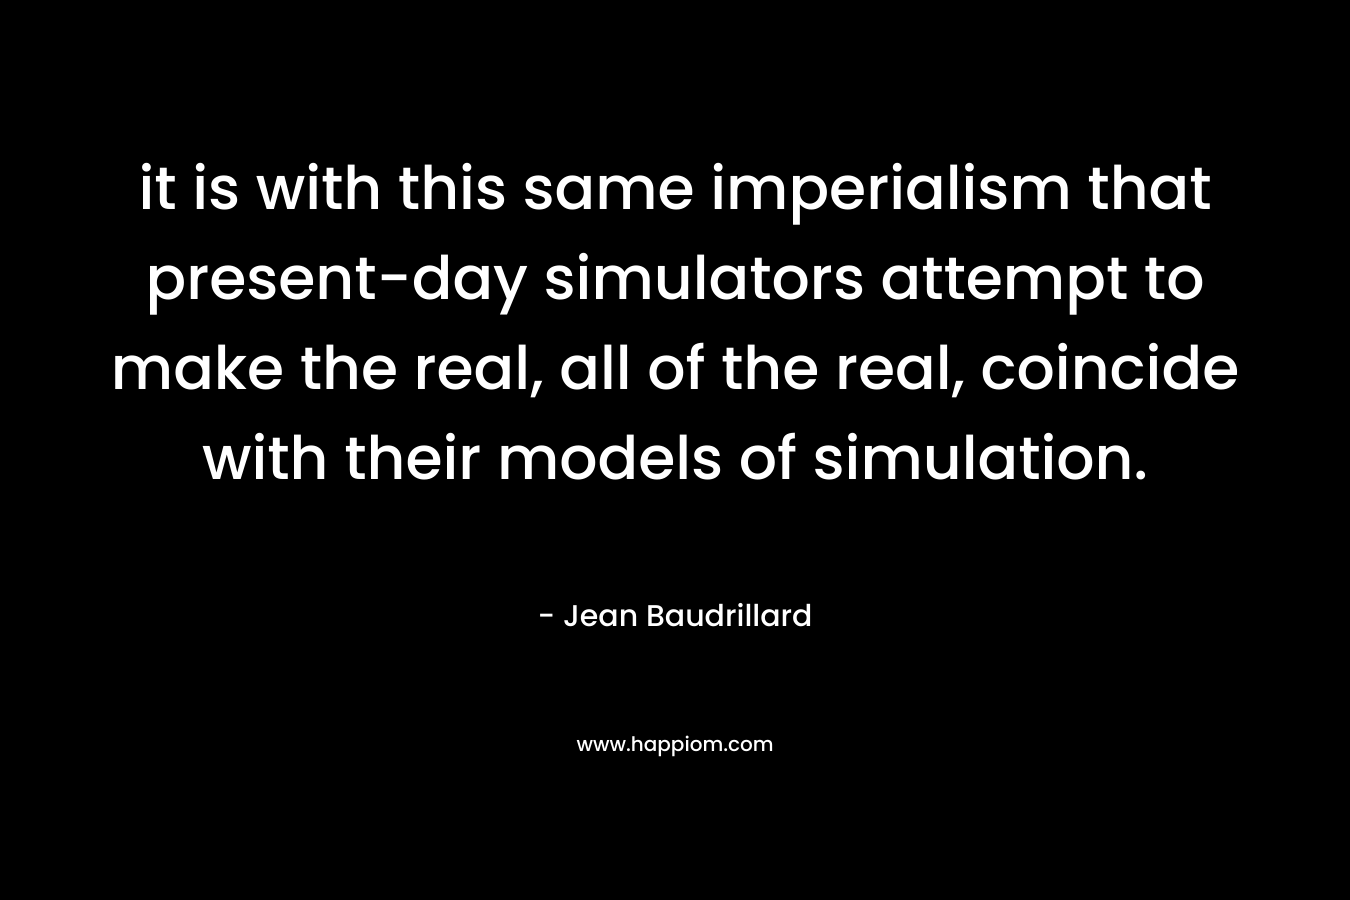 it is with this same imperialism that present-day simulators attempt to make the real, all of the real, coincide with their models of simulation.